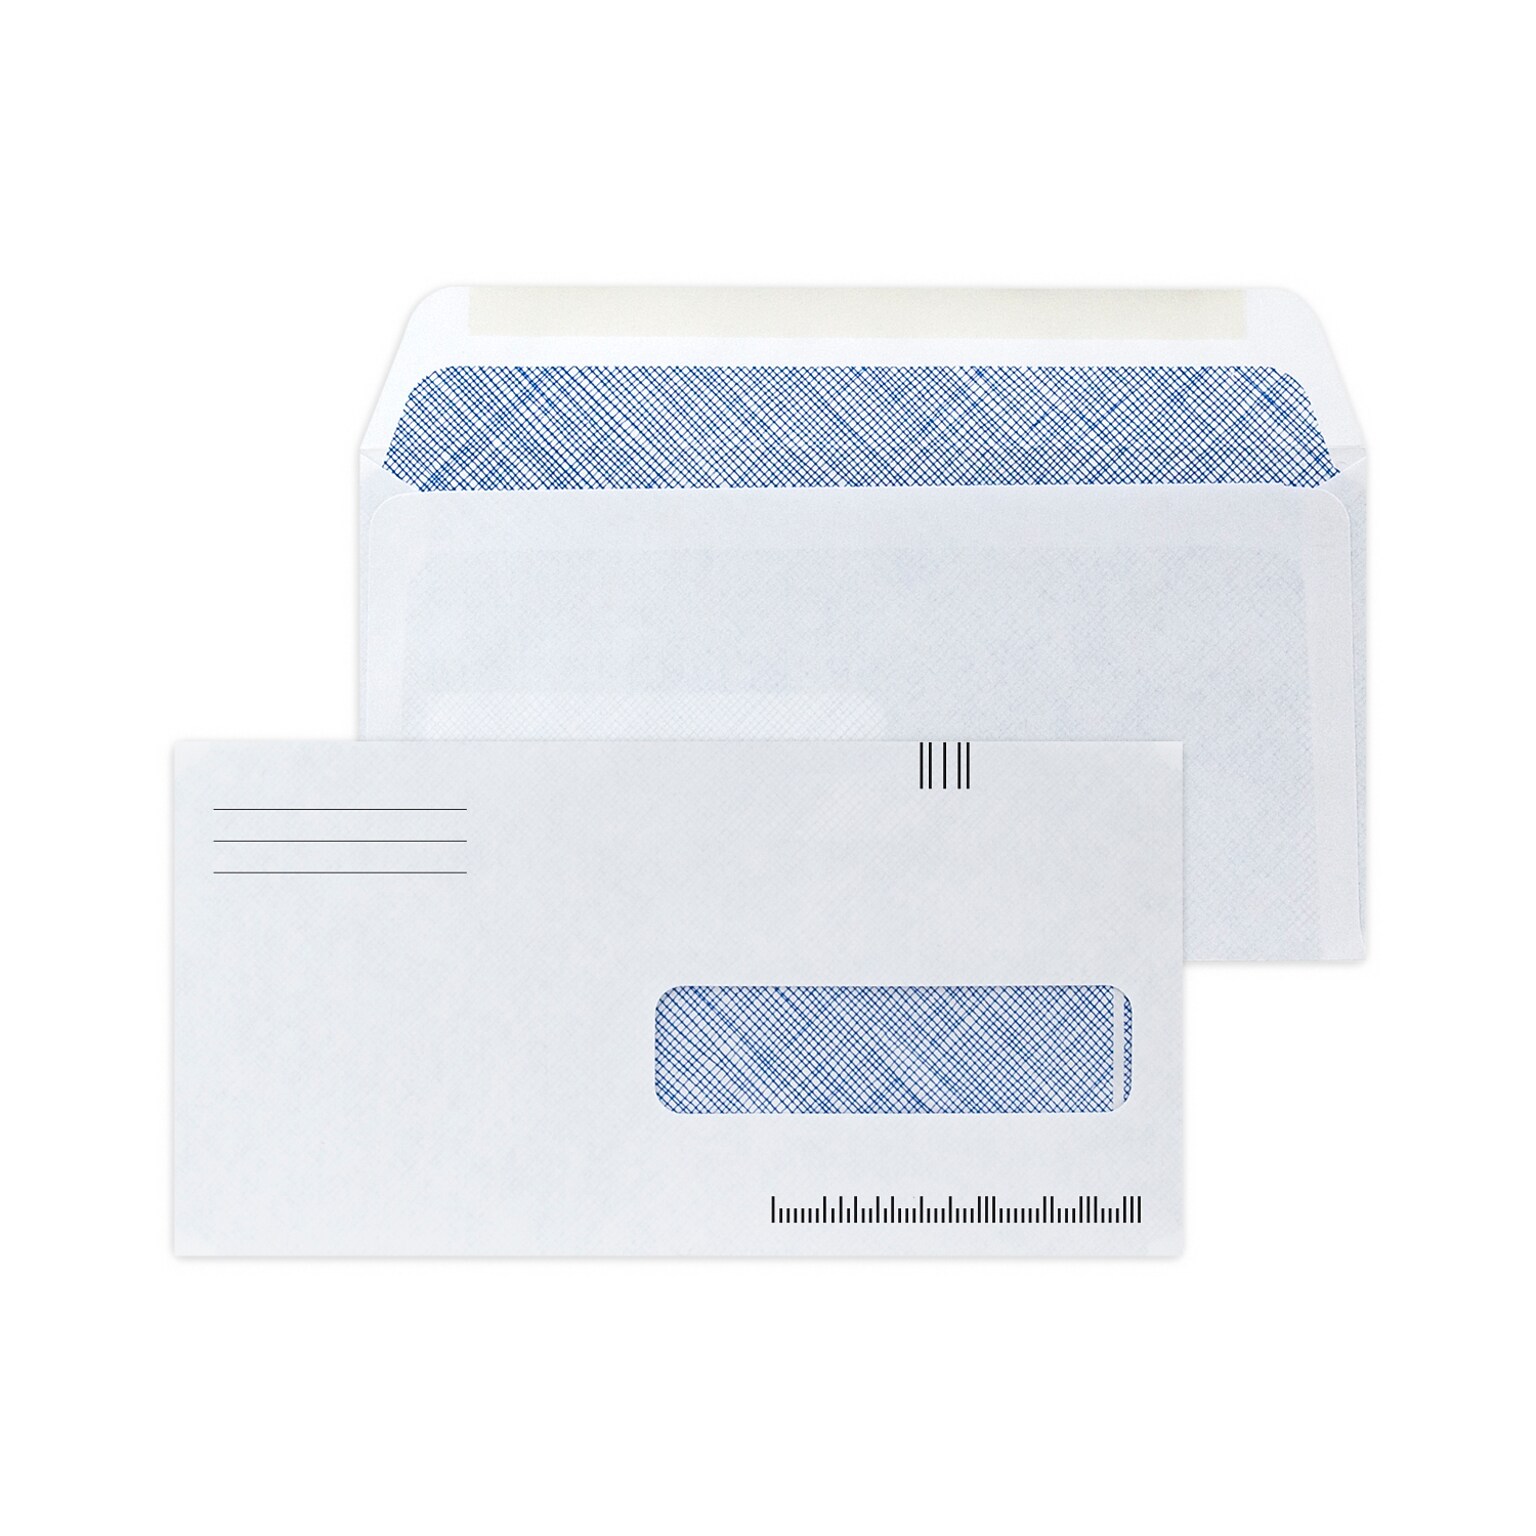 Custom 4-1/2x9 Barcode Insurance Claim Right Window Self Seal Envelope with Security Tint, 24# White Wove, 1 Std Ink, 250/Pack